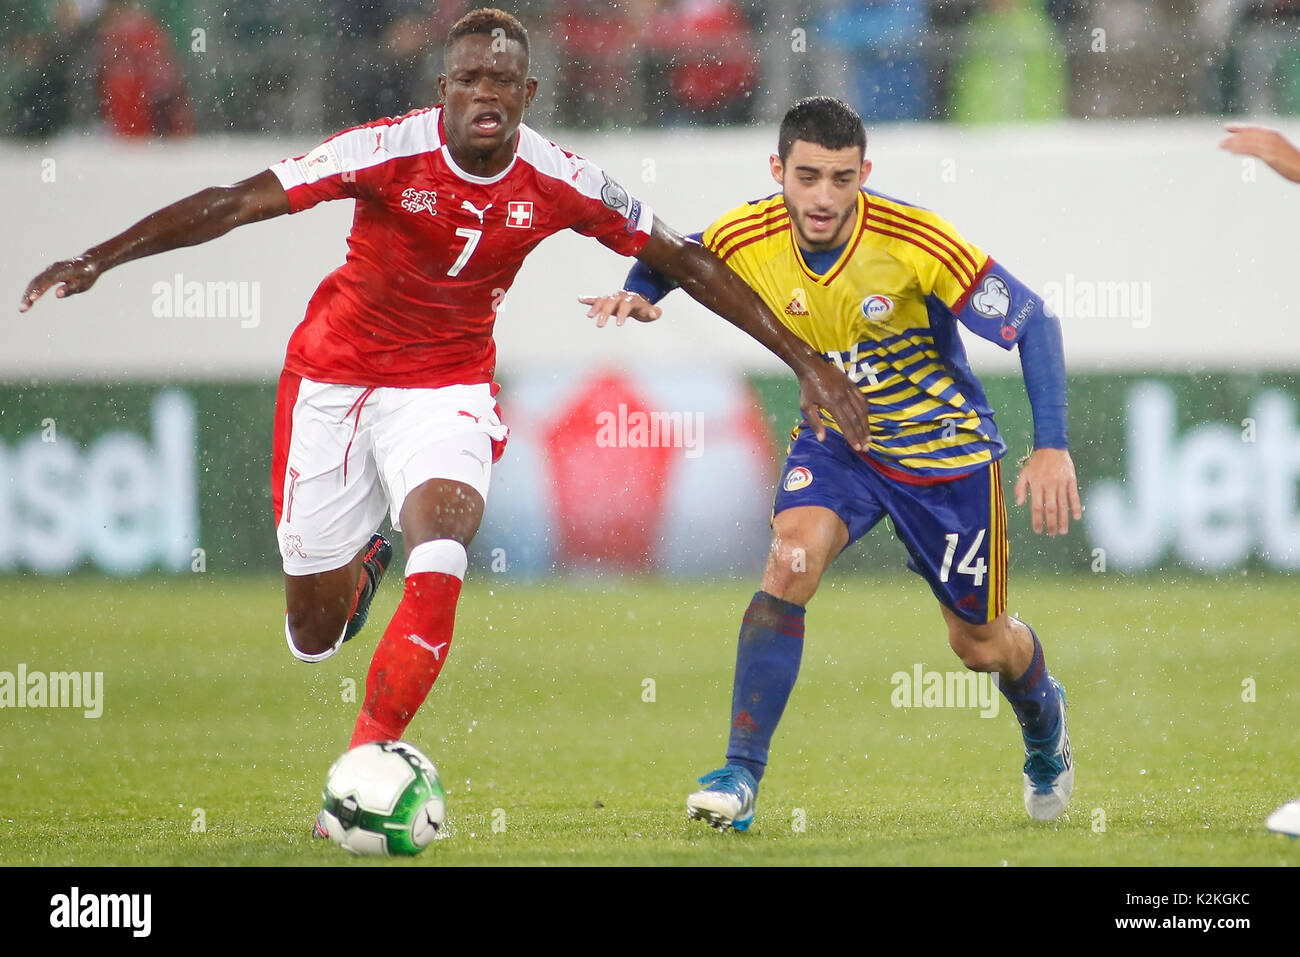 St. Gallen, Switzerland. 31st Aug, 2017. Denis Zakaria (L) of Switzerland vies with Jordi Alaez of Andorra during the FIFA World Cup 2018 Qualifiers Group B match between Switzerland and Andorra in St. Gallen, Switzerland, Aug. 31, 2017. Switzerland won 3-0. Credit: Michele Limina/Xinhua/Alamy Live News Stock Photo